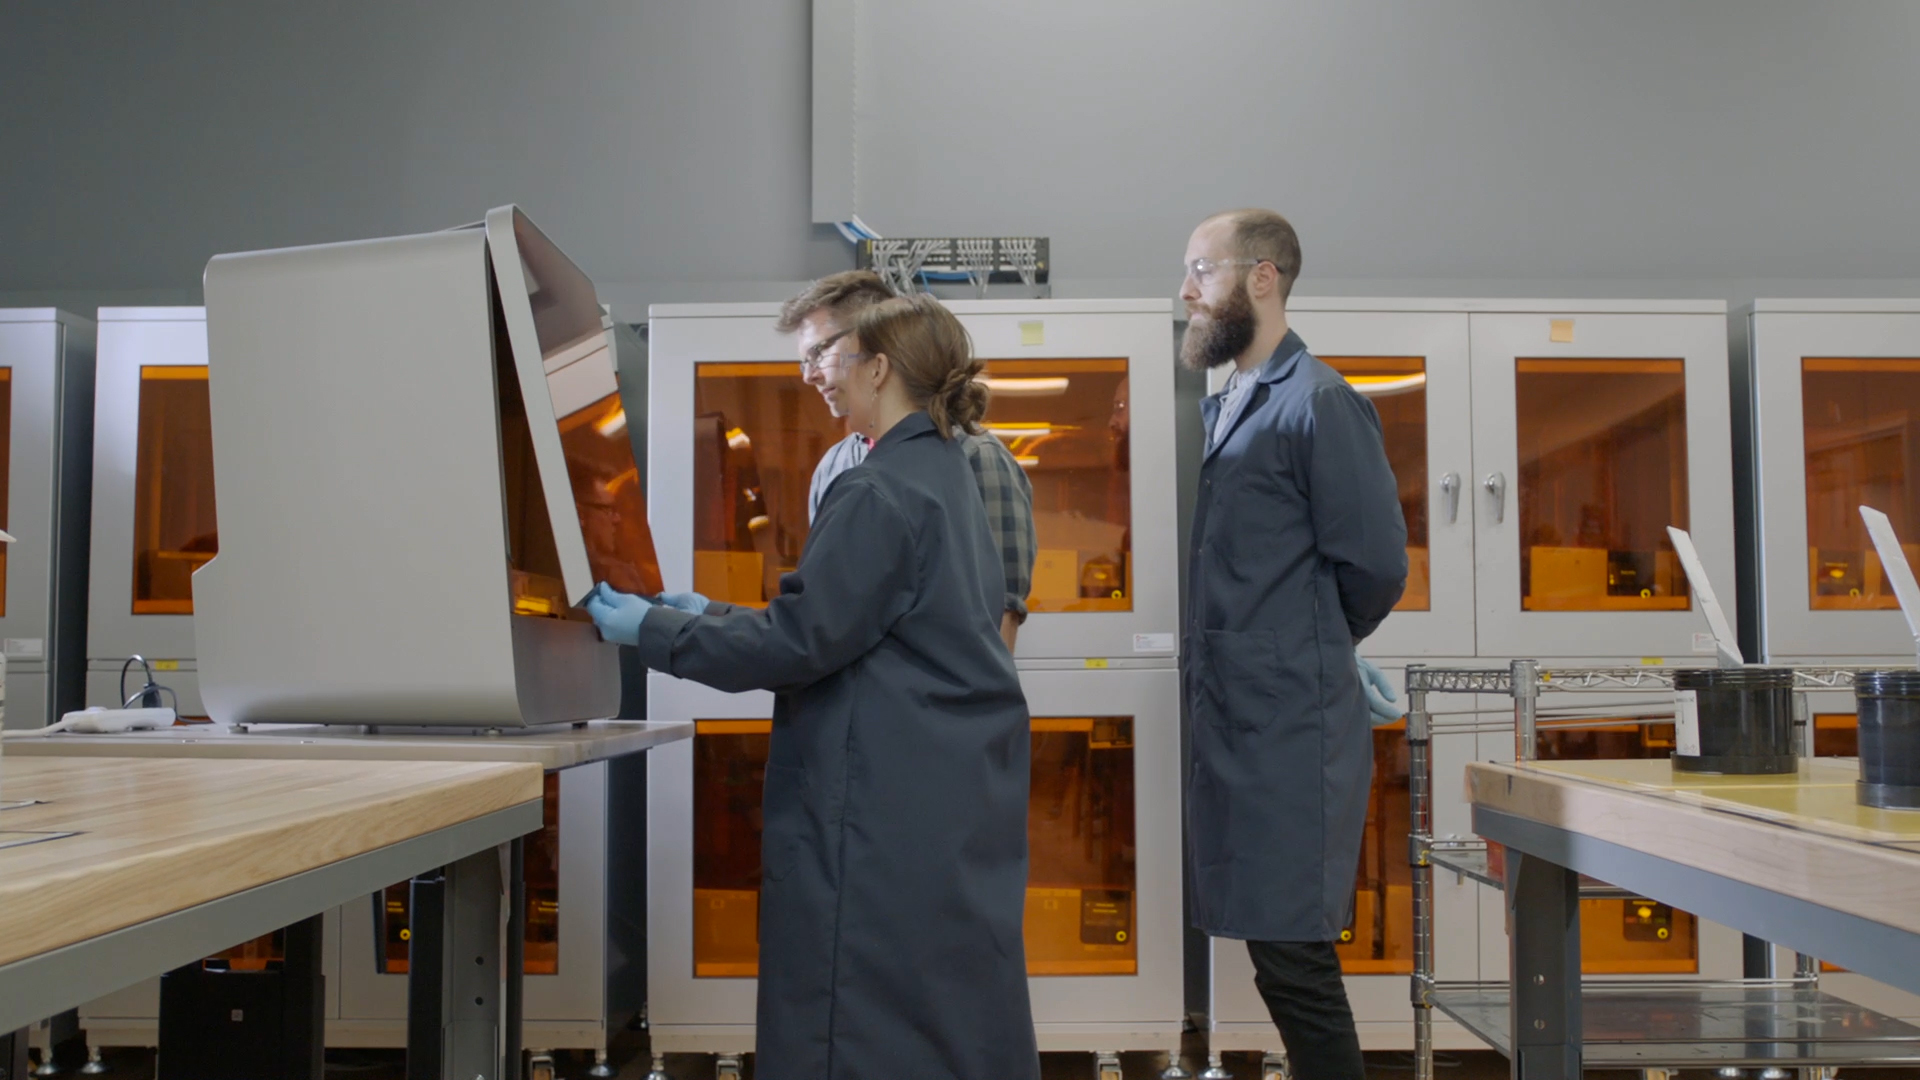 Image of New Balance team with Formlabs 3D printers